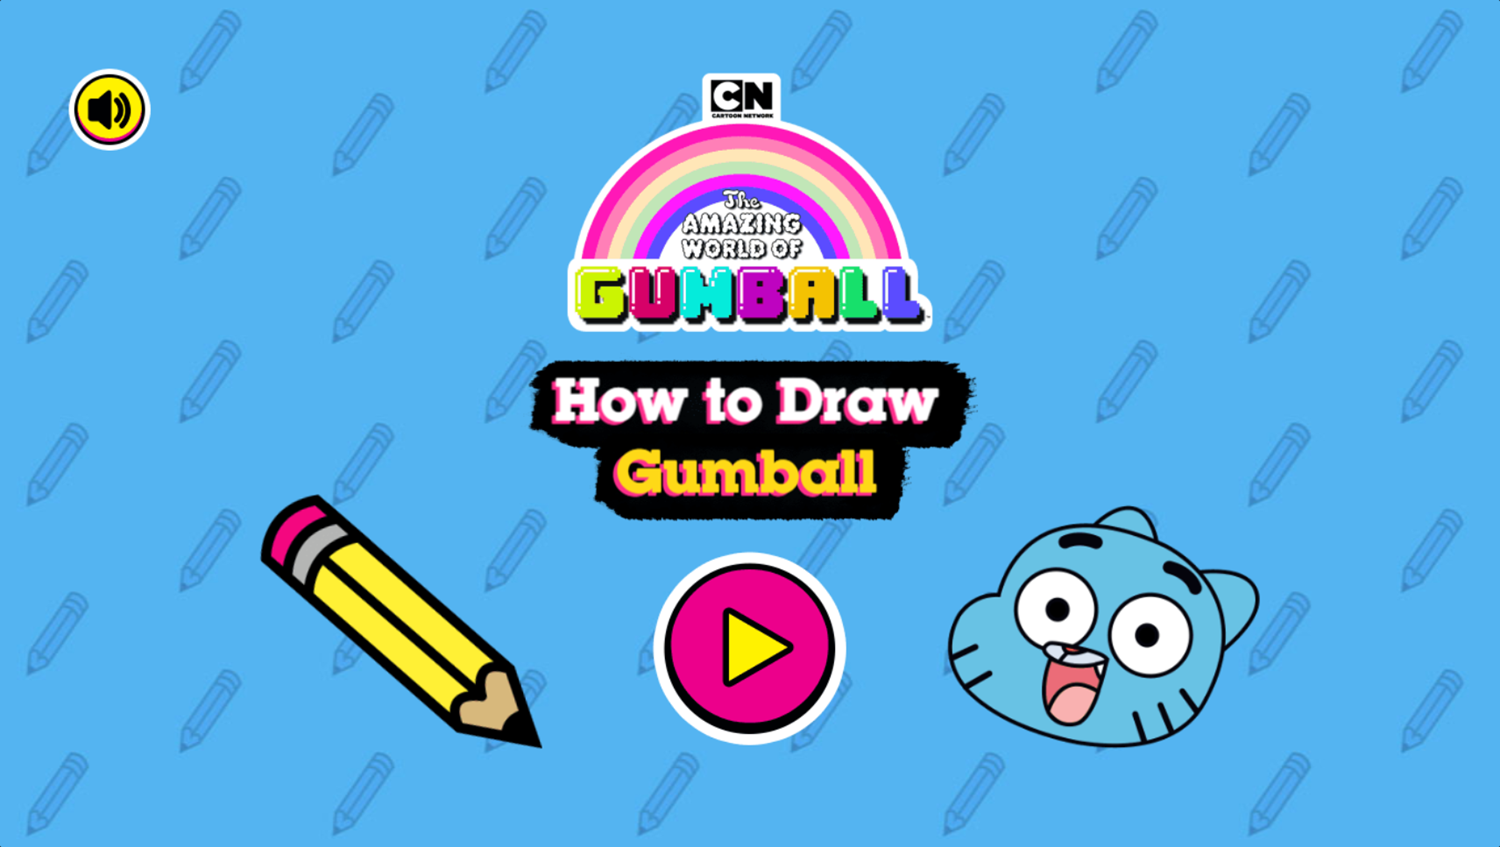 Amazing World of Gumball How to Draw Gumball Game Welcome Screen Screenshot.